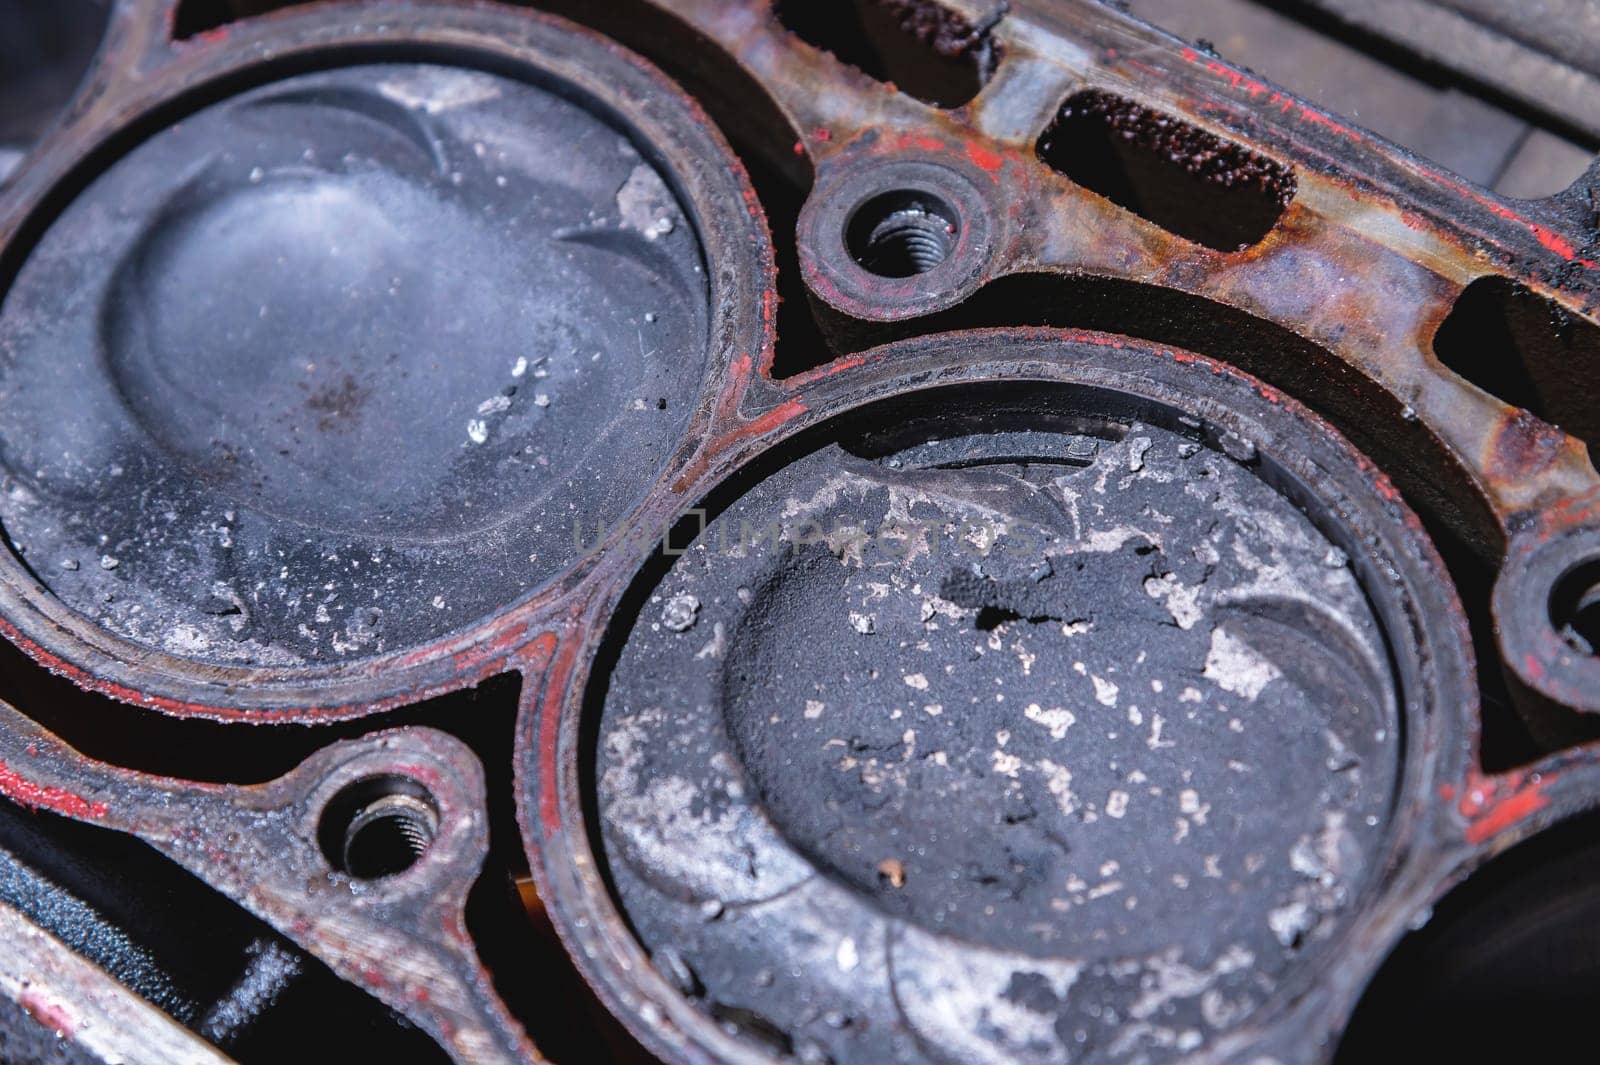 Close-up of a damaged piston of an internal combustion engine with carbon deposits in the cylinder block of a faulty engine by yanik88